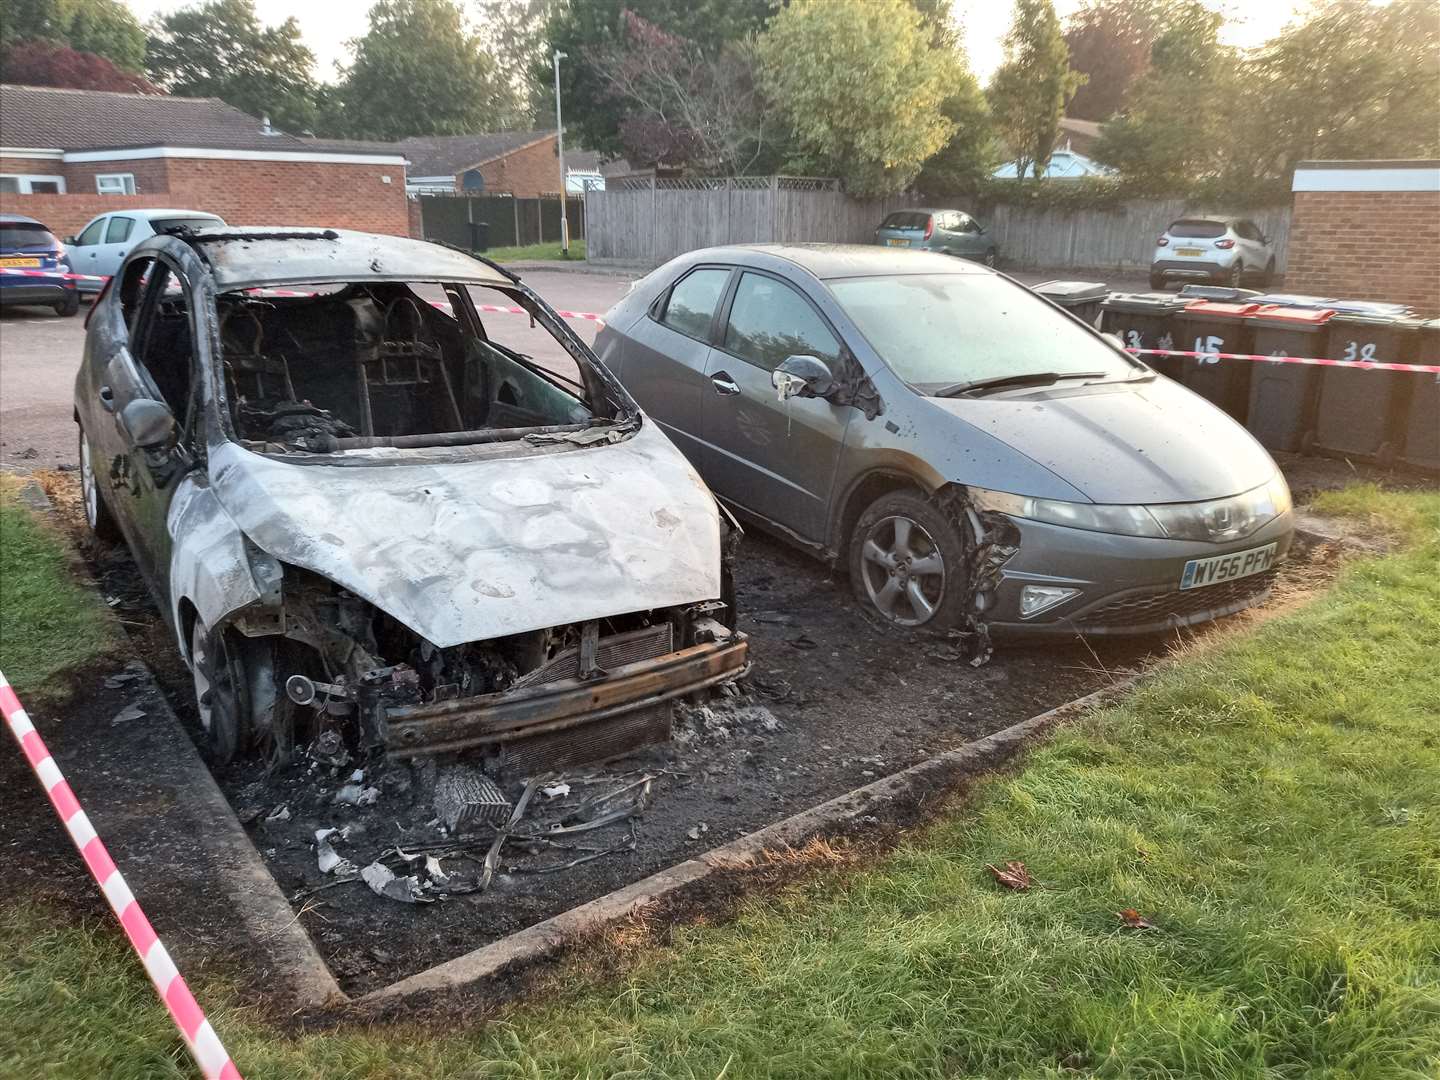 Several cars were left burnt out in Bishops Way, Canterbury this morning